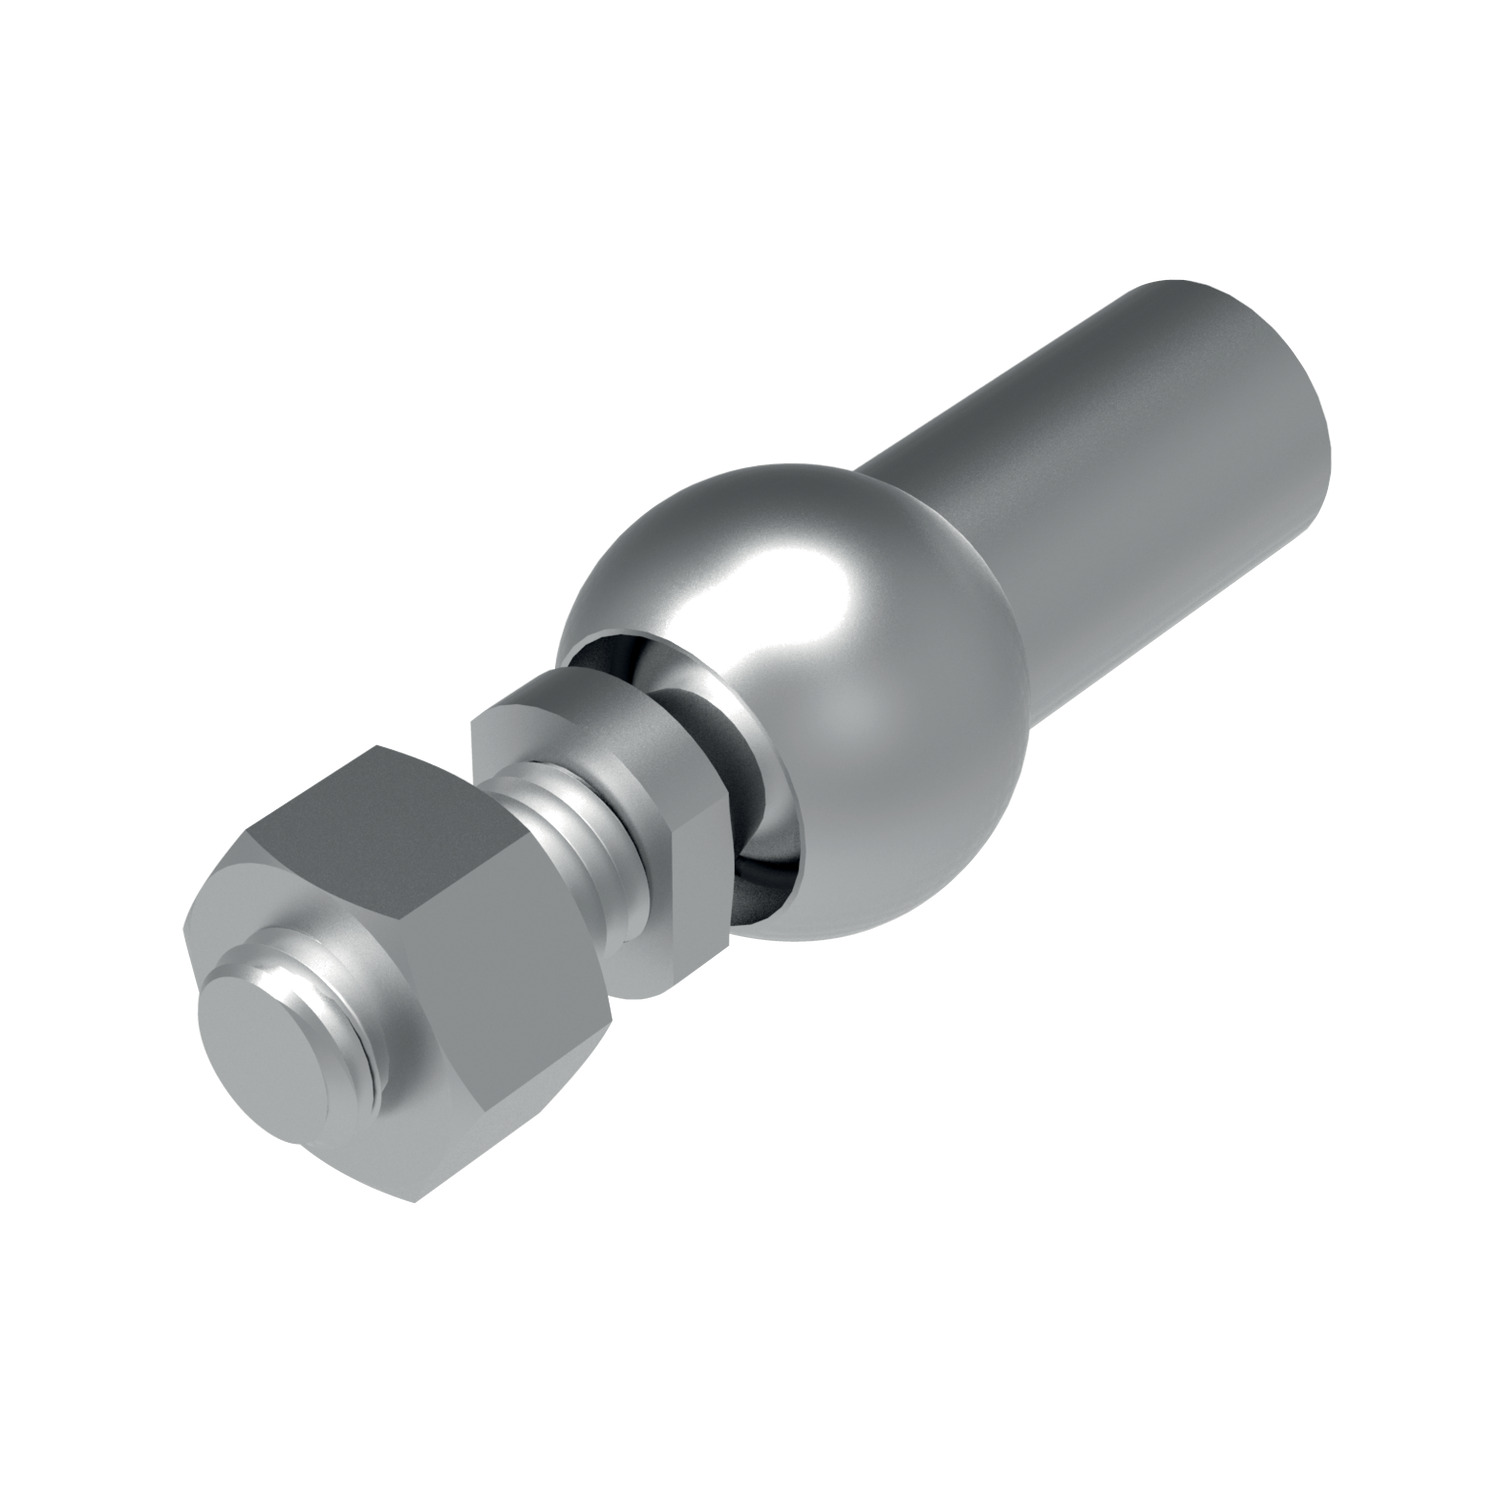 R3501 - Axial Ball and Socket Joints